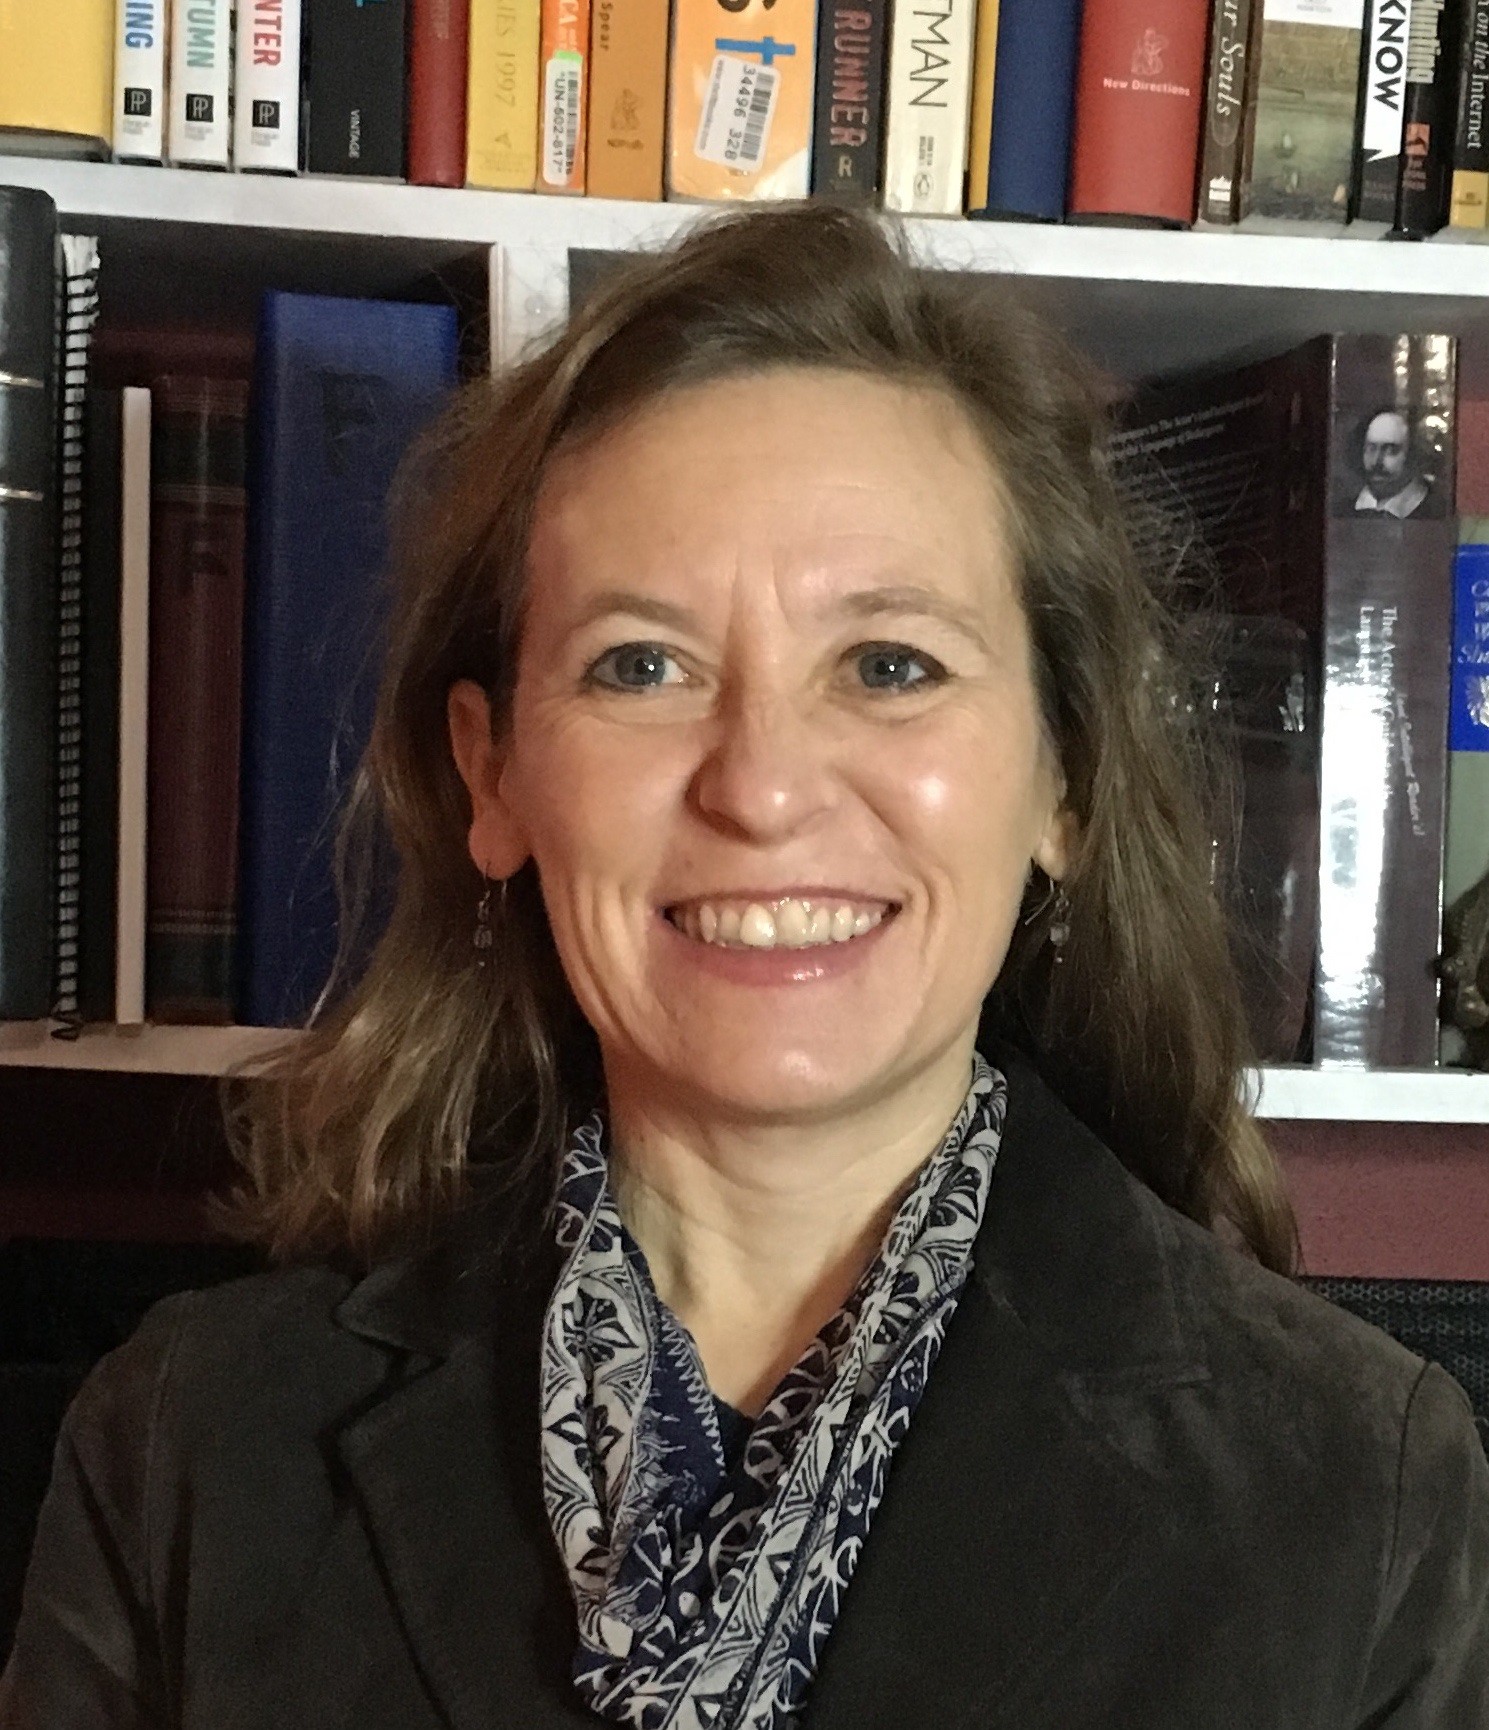 Photo of dr. Marguerite Burns, smiling in front of books